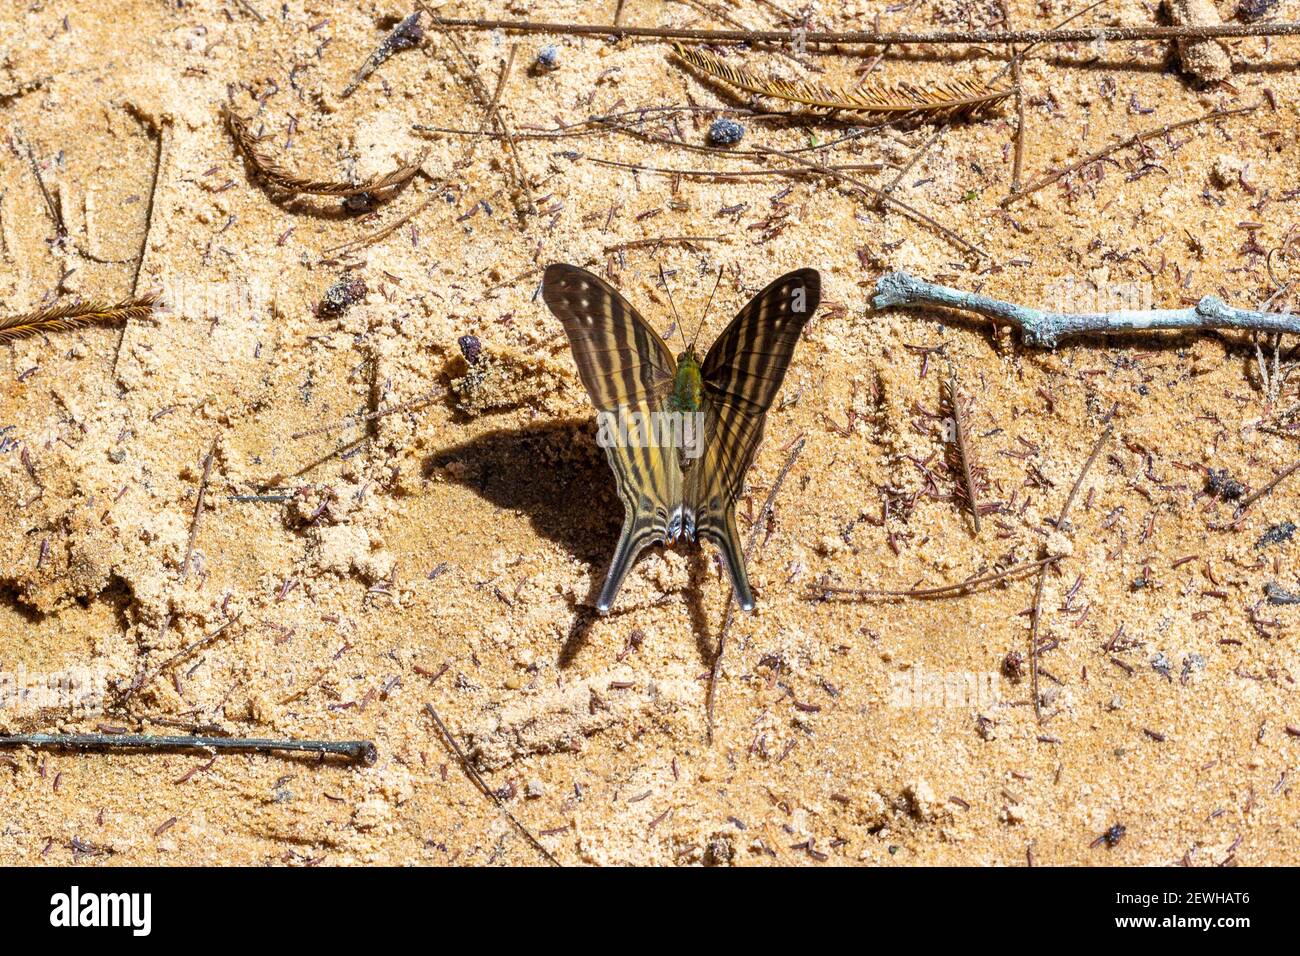 Brazilian Wildlife: Close-up of the many-banded daggerwing (Marpesia chiron) in natural habitat close to Chapada dos Guimaraes in Mato Grosso, Brazil Stock Photo